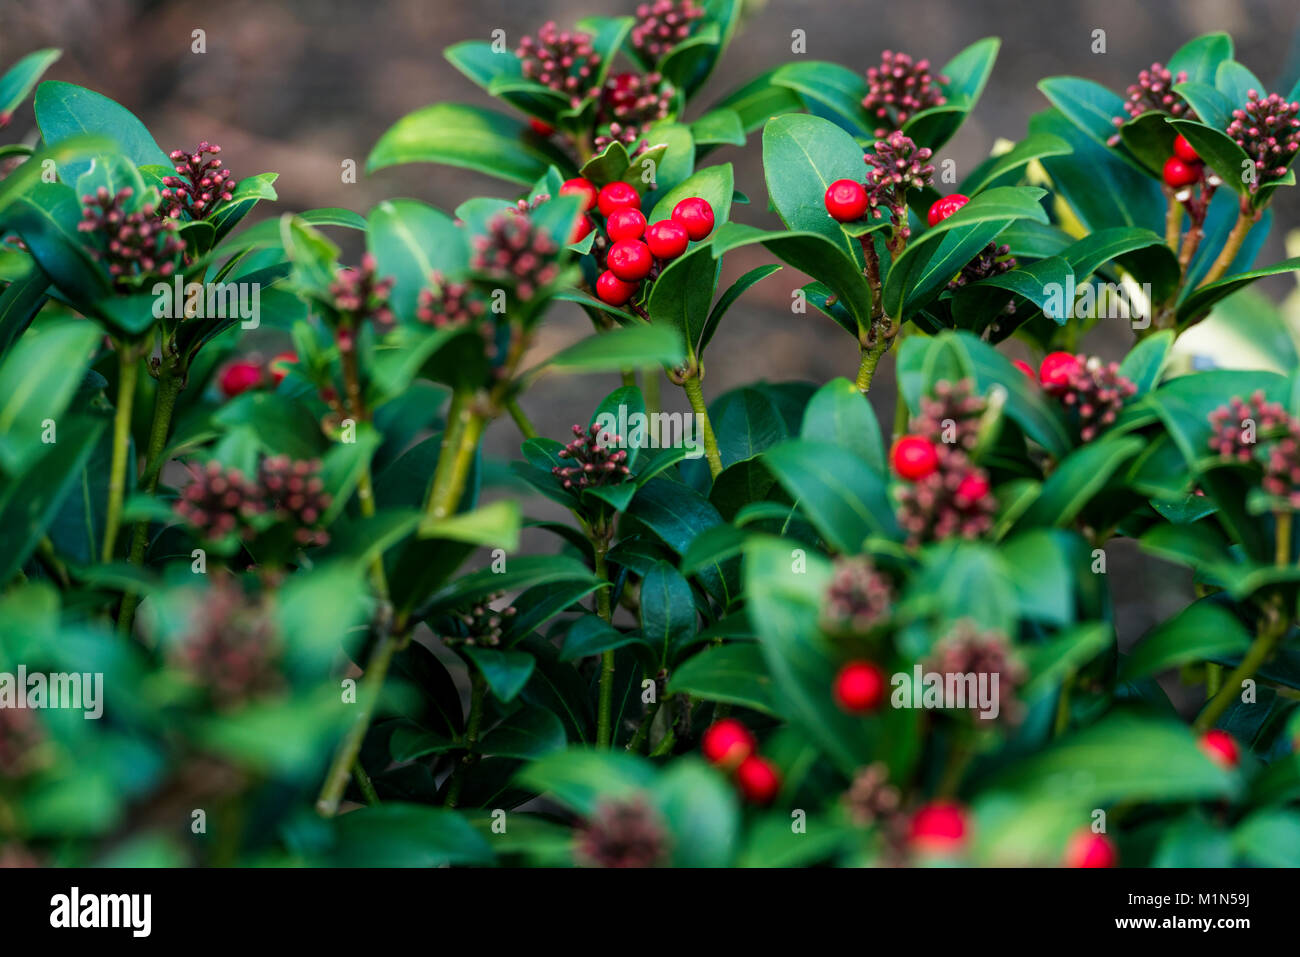 Skimmia japonica, Olympic Flame. Red berries and flower buds, shown in winter. Stock Photo